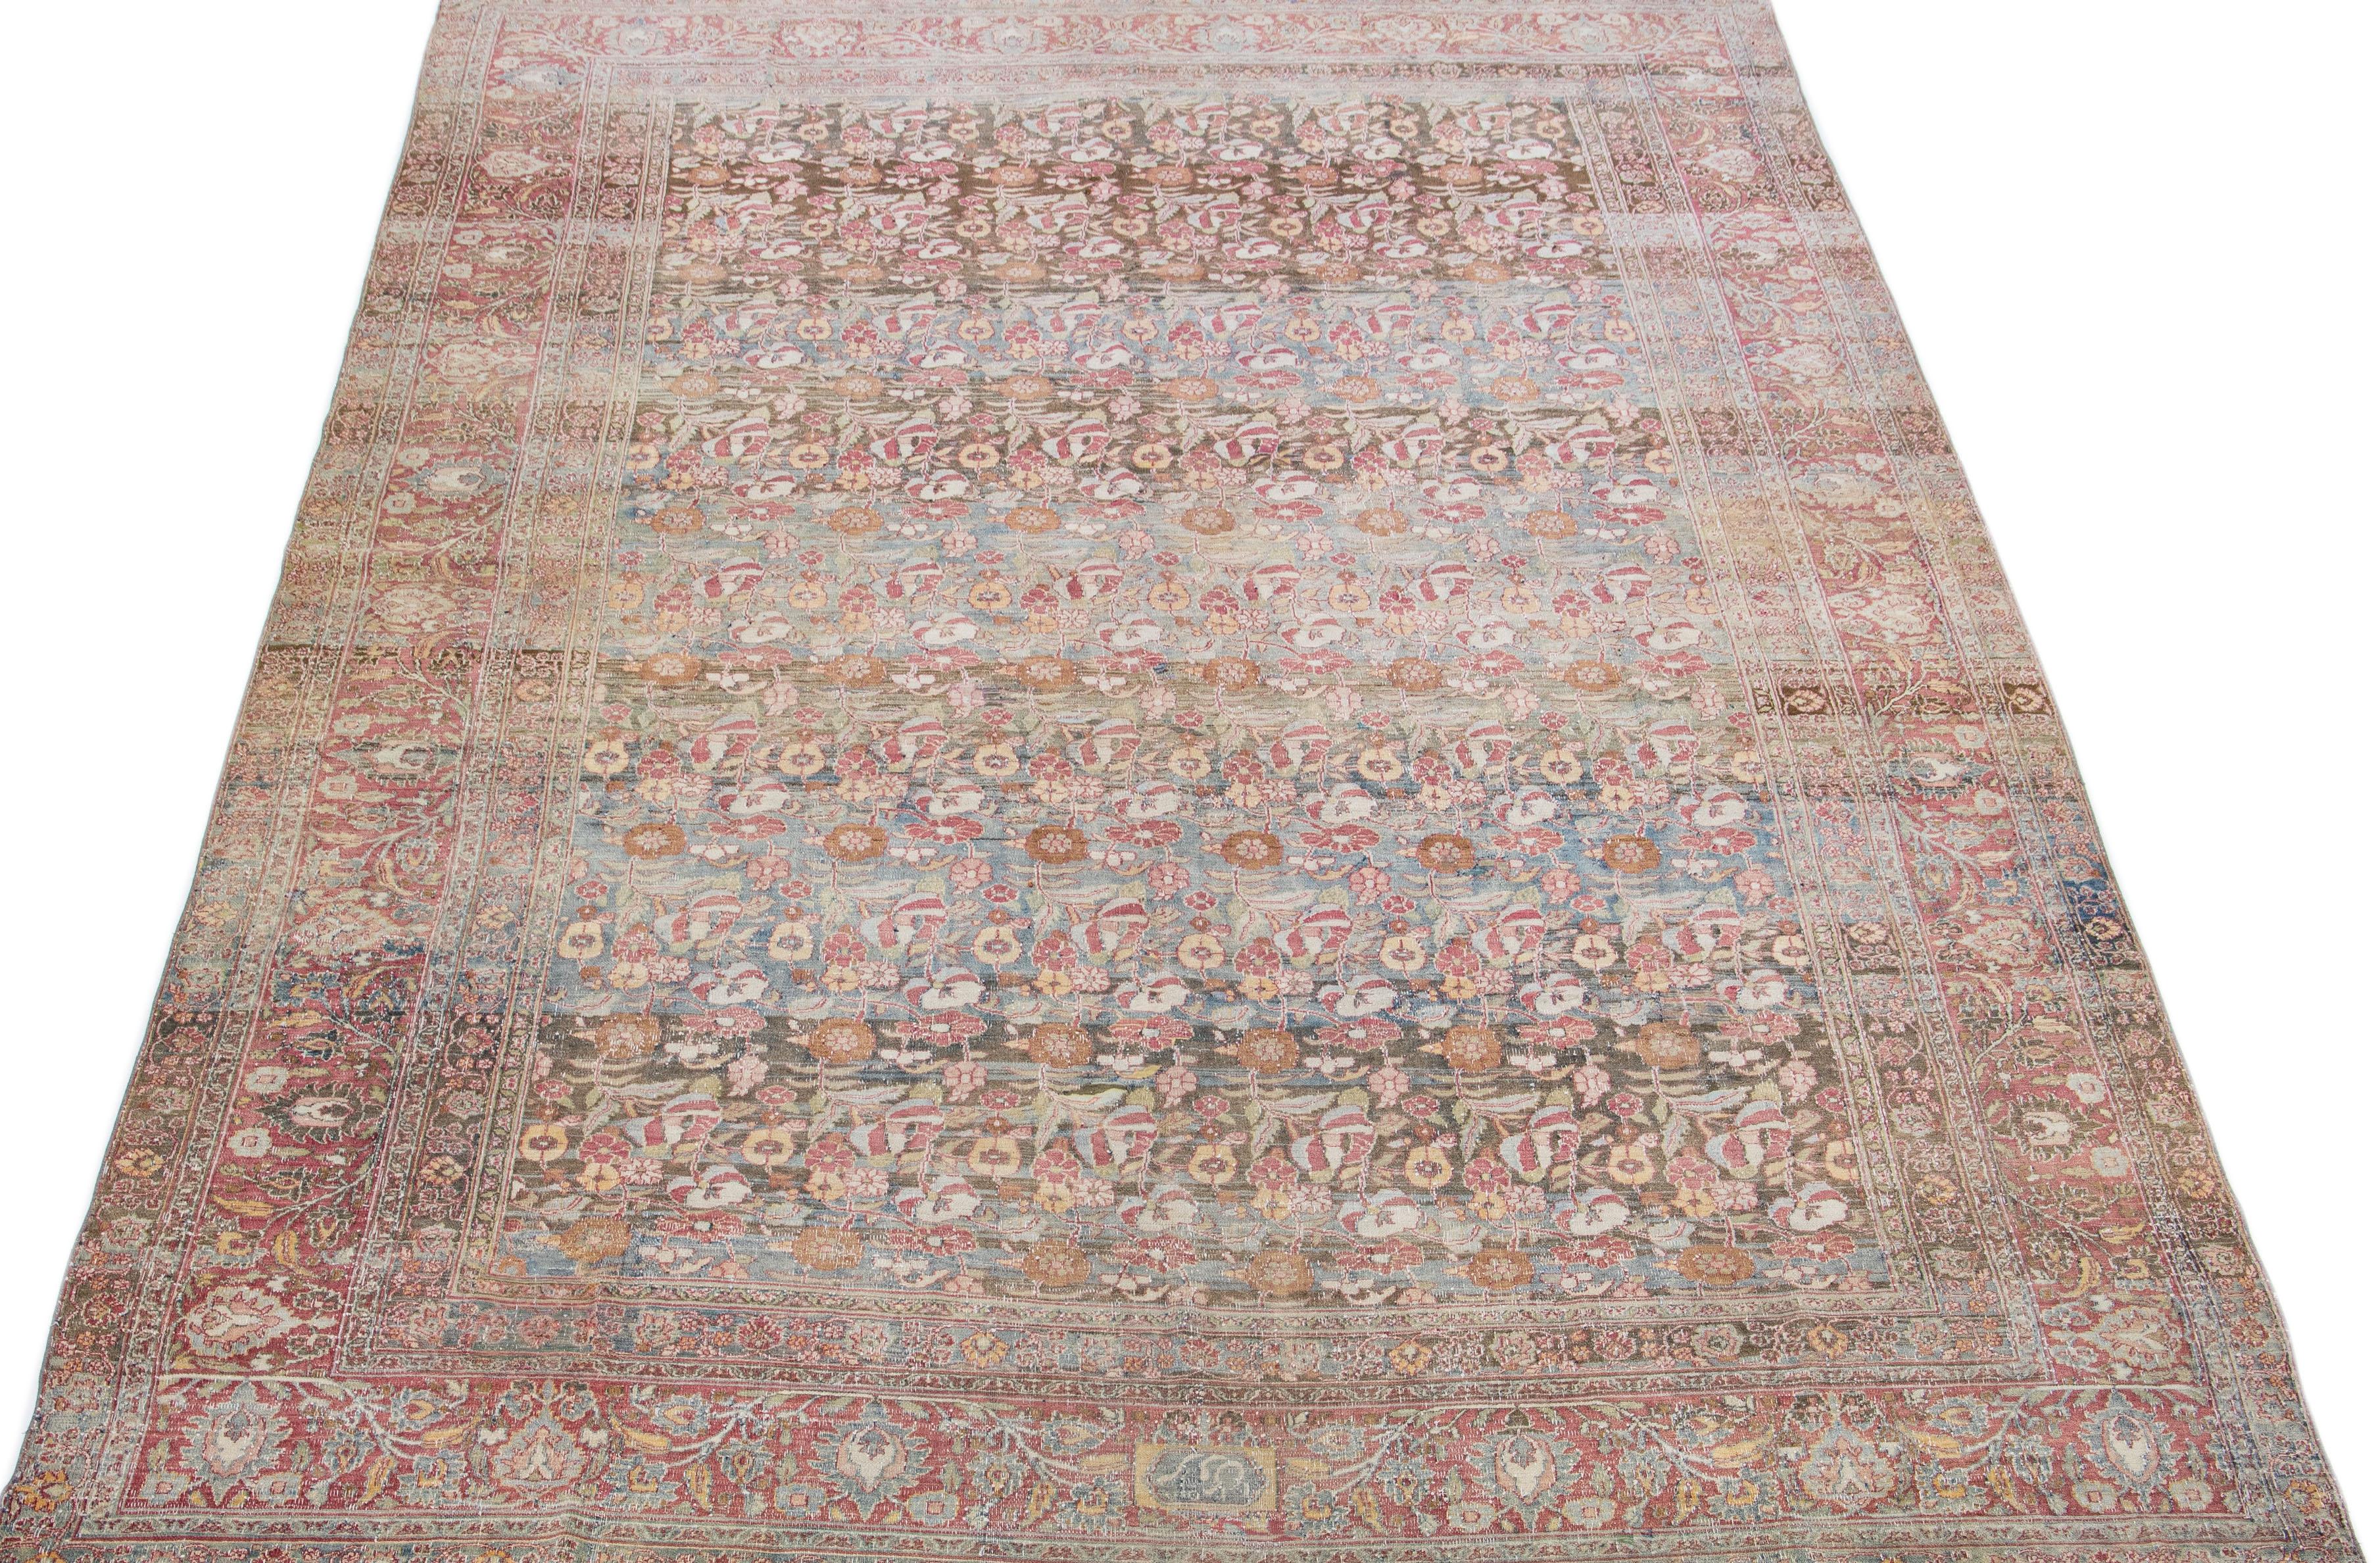 Beautiful hand-knotted antique oversize mahal wool rug with a blue field. This Persian rug has red, brown, and blue accent colors with an all-over floral design. 

This rug measures 9'3